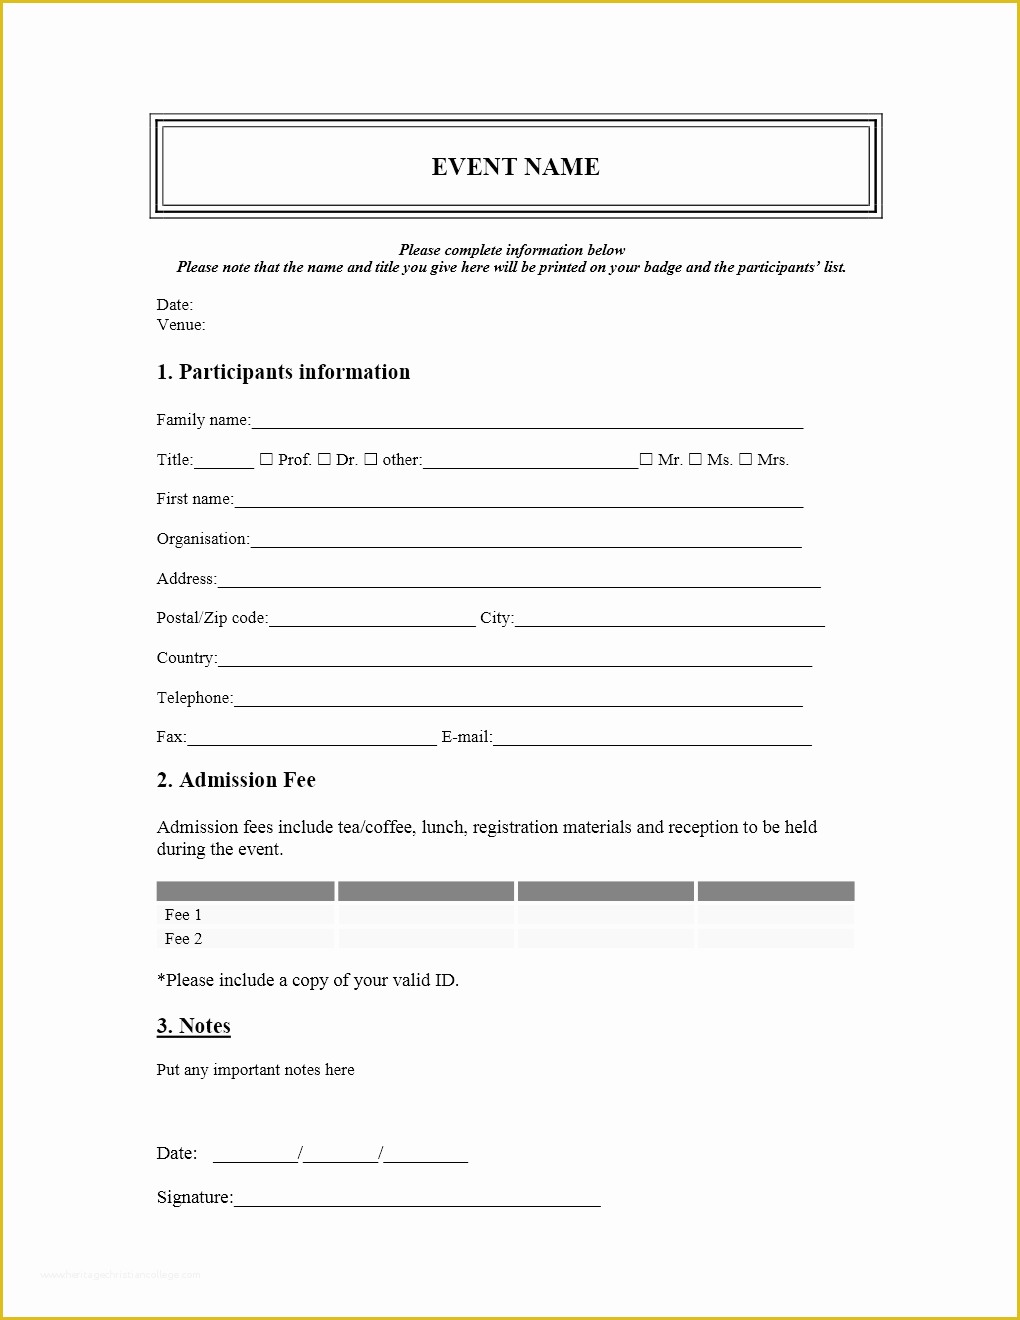 Class Registration form Template Free Of event Registration form